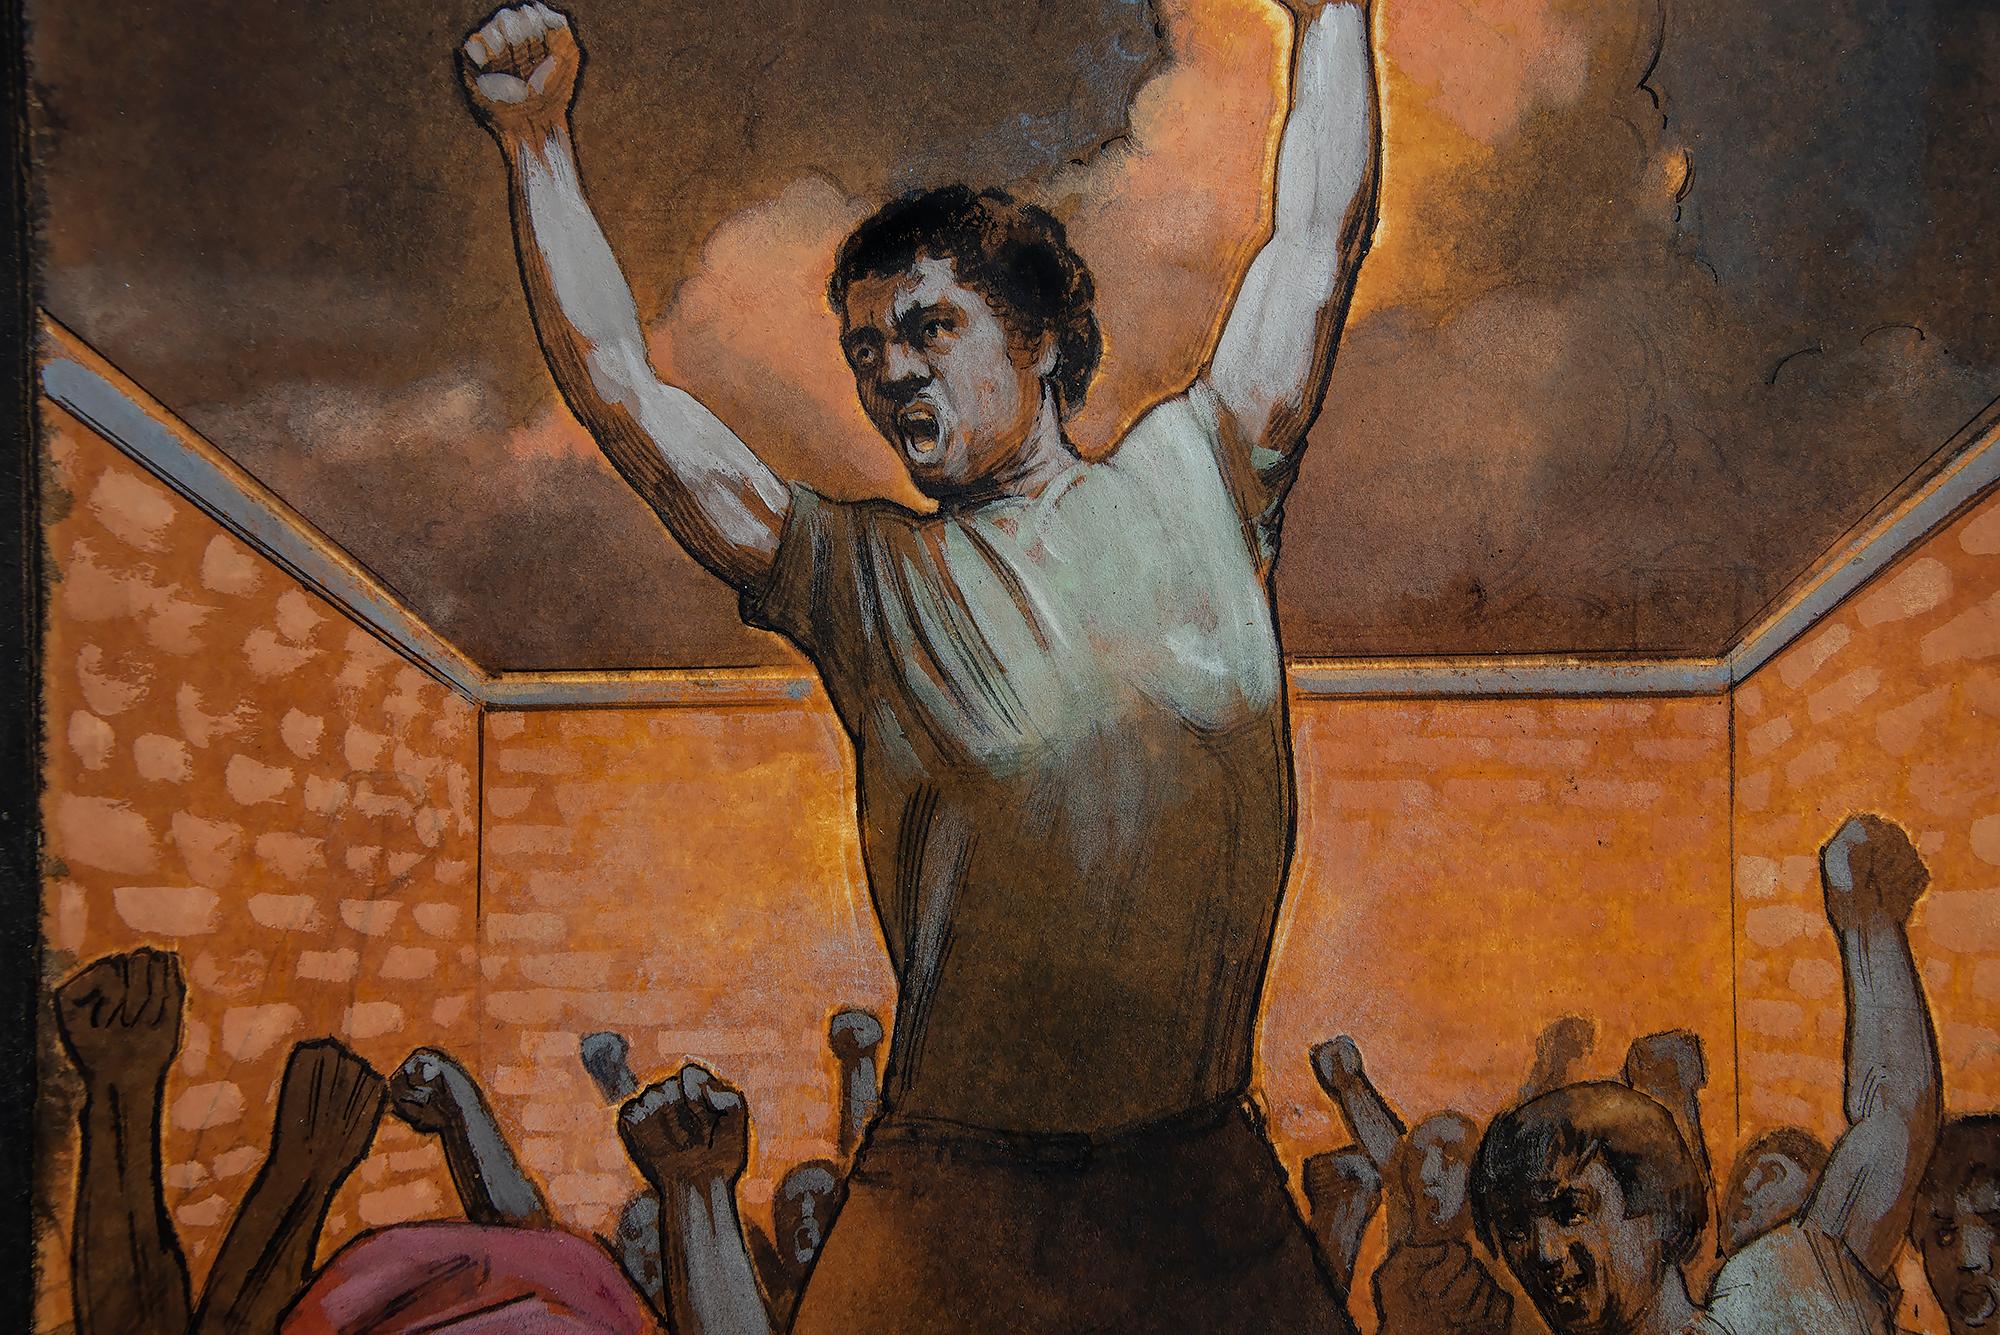 Protest Revolt and Uprising illustration - Painting by Daniel Maffia